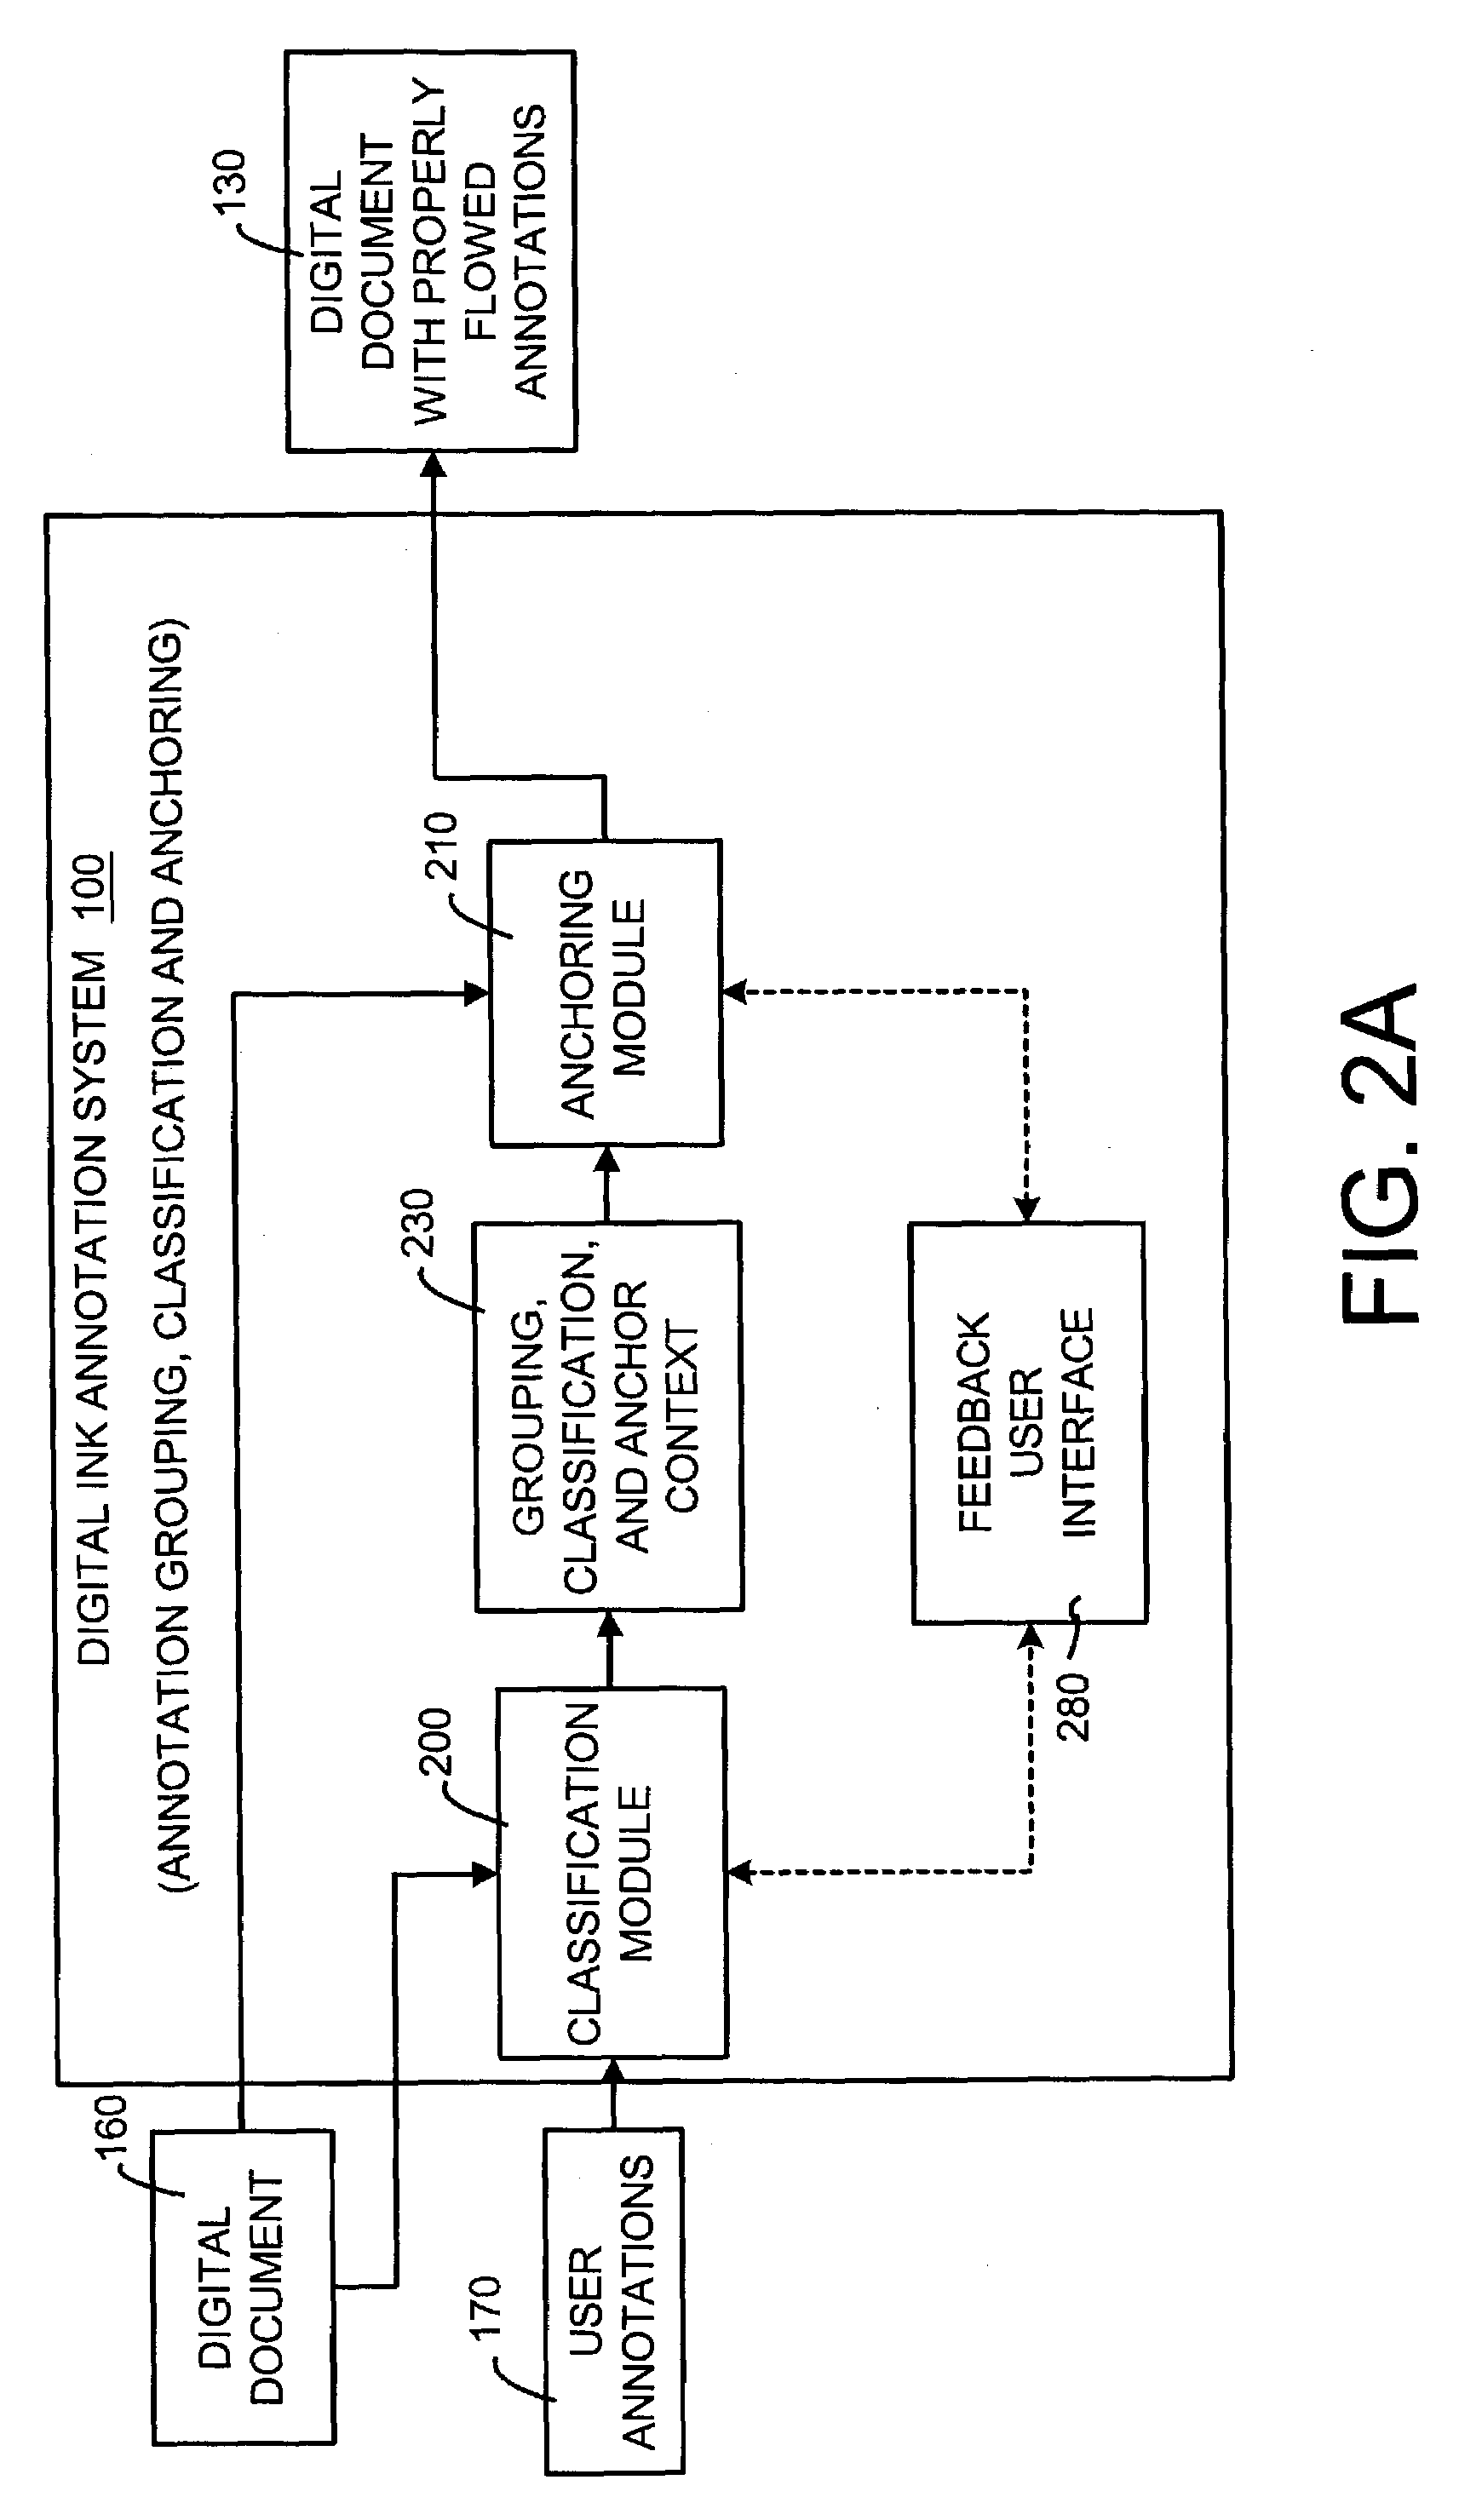 Digital ink annotation process and system for recognizing, anchoring and reflowing digital ink annotations